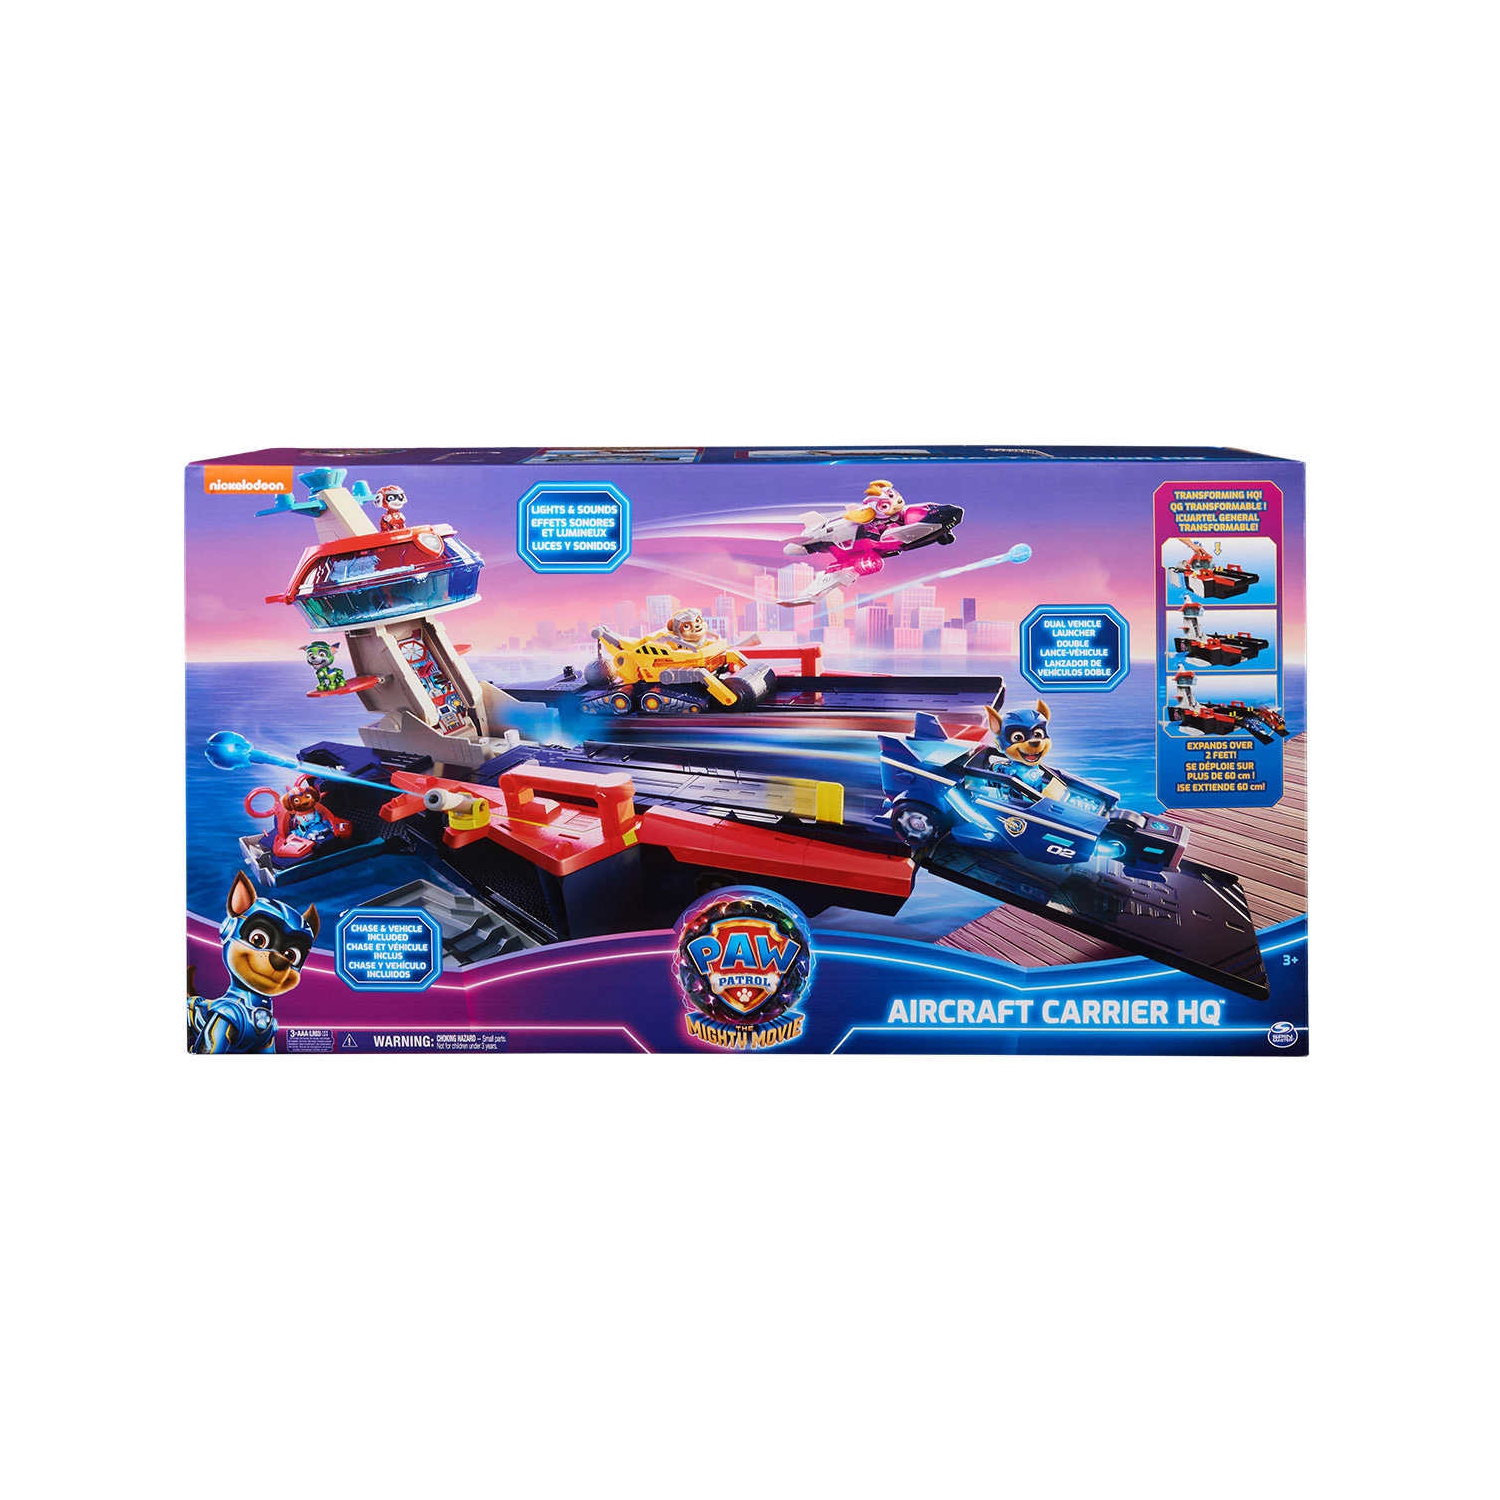 PAW Patrol The Mighty Movie, Aircraft Carrier HQ, with Chase Action Figure and Mighty Pups Cruiser, Kids Toys for Boys & Girls 3+